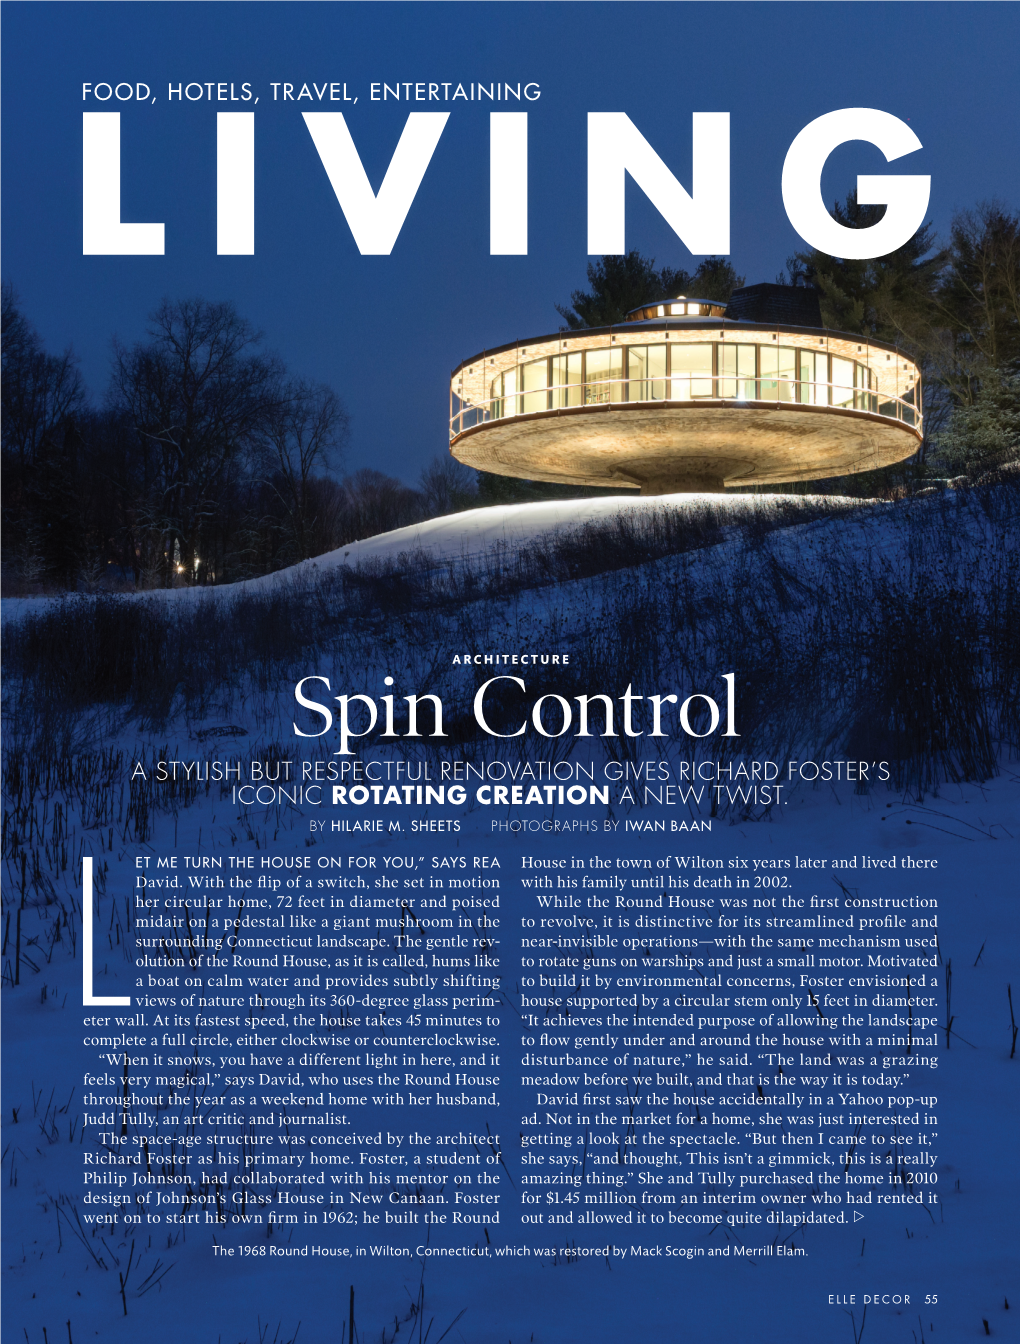 Spin Control a STYLISH but RESPECTFUL RENOVATION GIVES RICHARD FOSTER’S ICONIC ROTATING CREATION a NEW TWIST